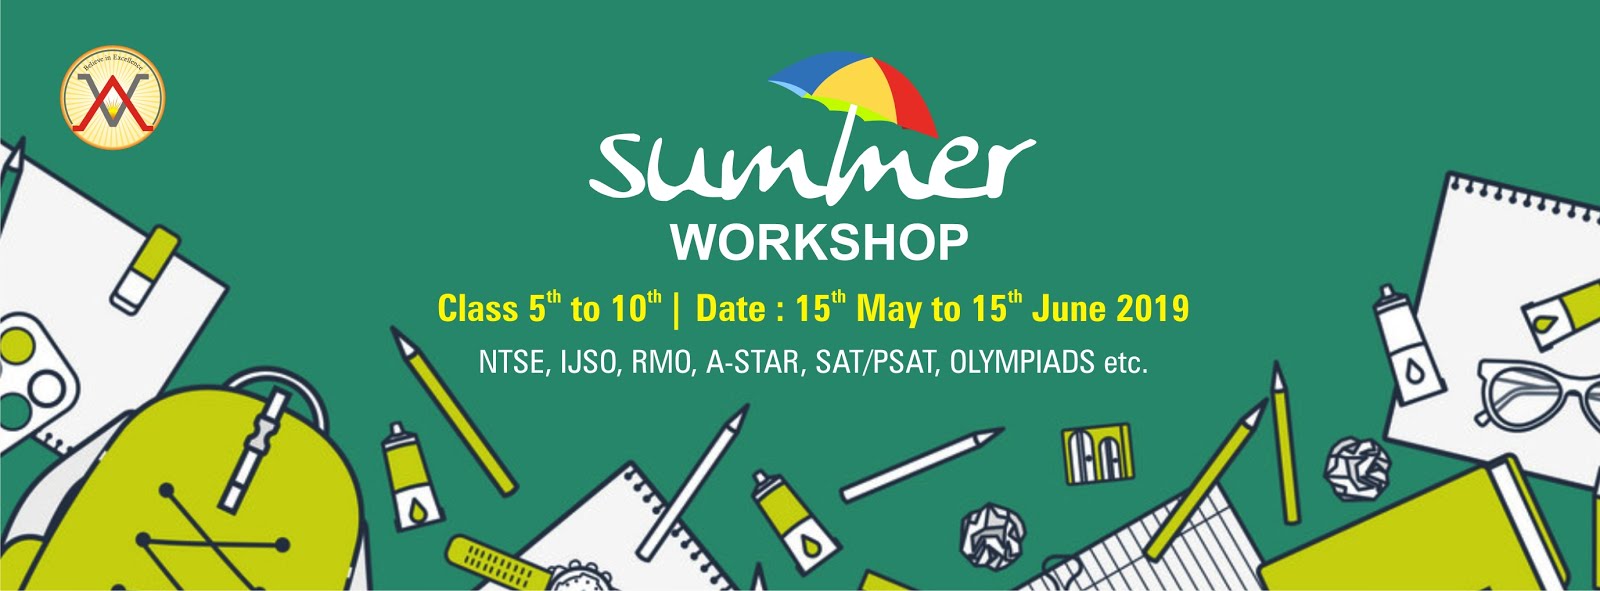 Summer Workshop For Class 05th to 10th